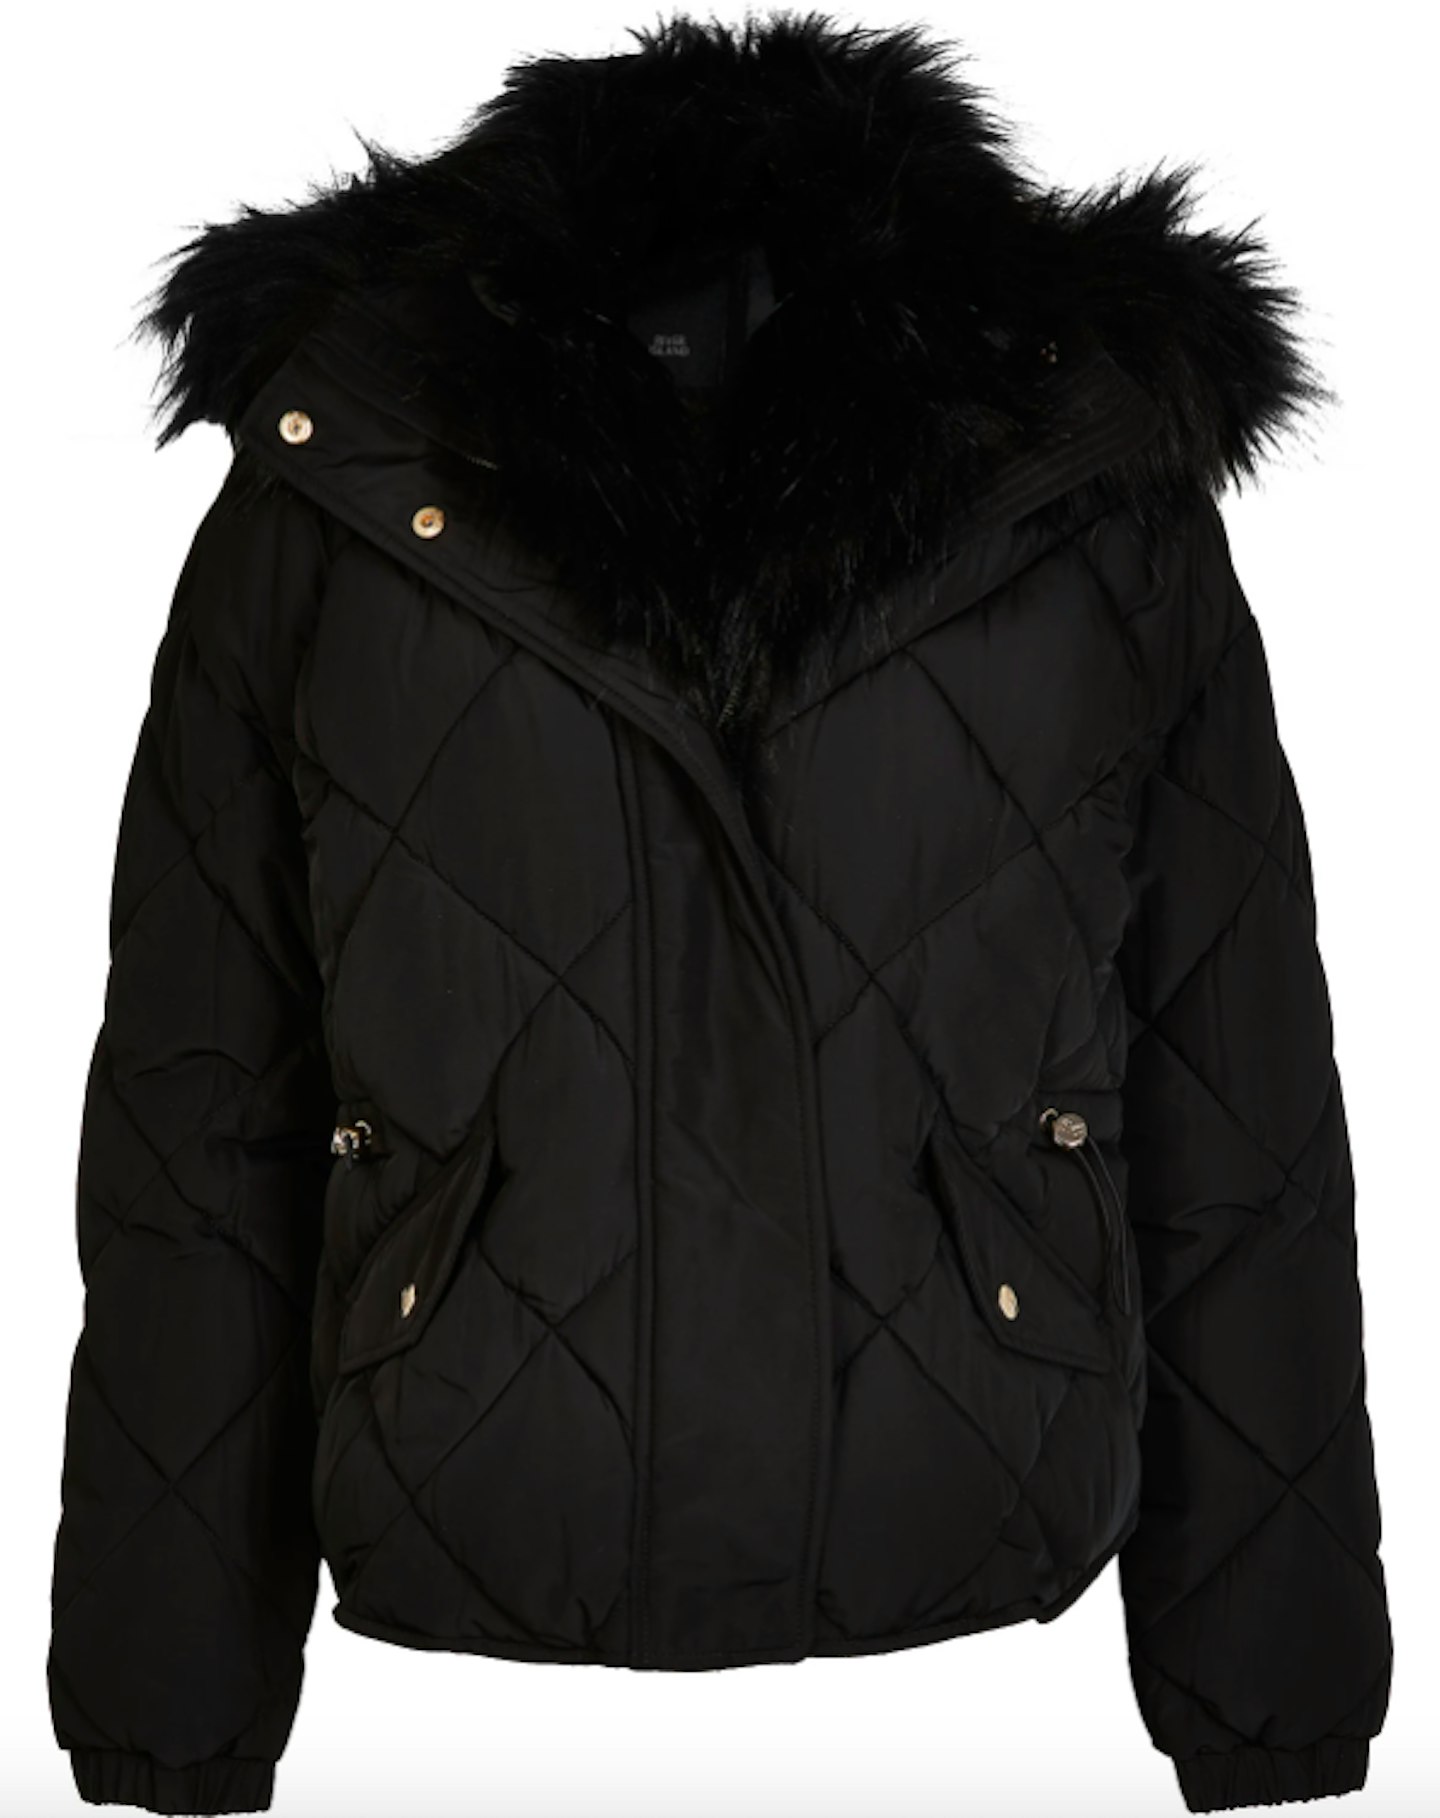 Black Quilted Puffer Coat, WAS £80 NOW £50